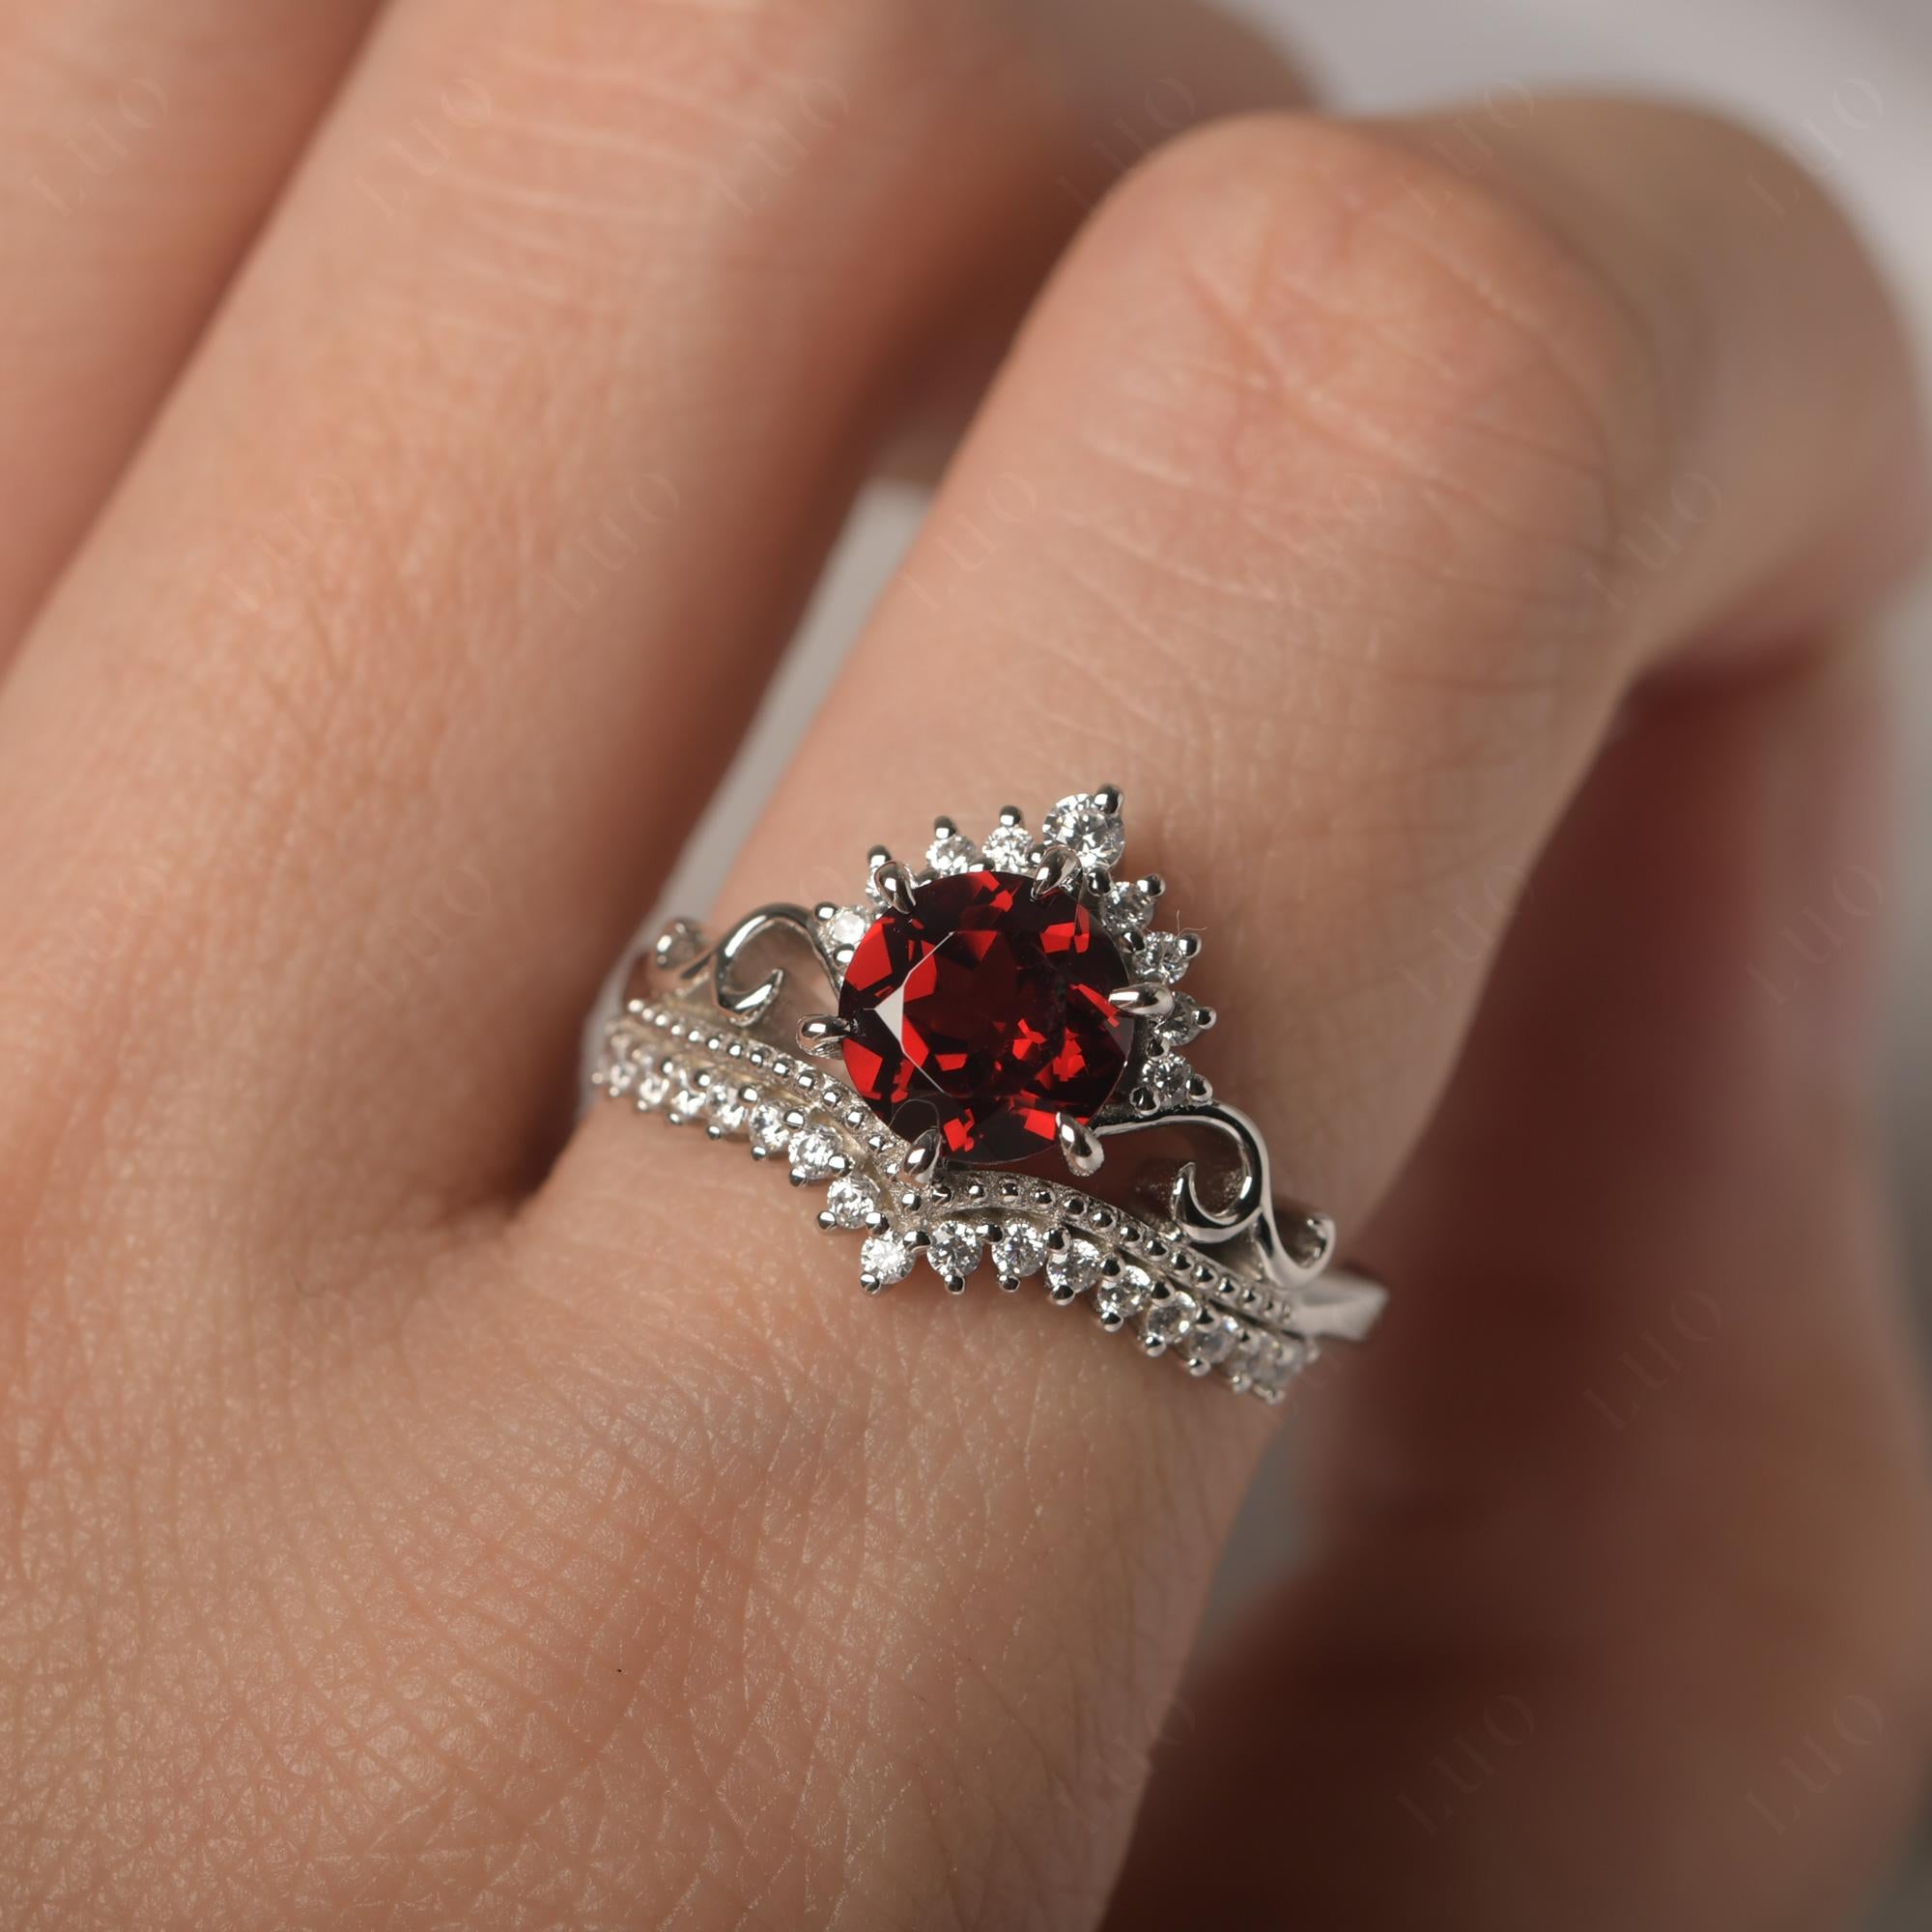 Vintage Garnet Cocktail Ring - LUO Jewelry